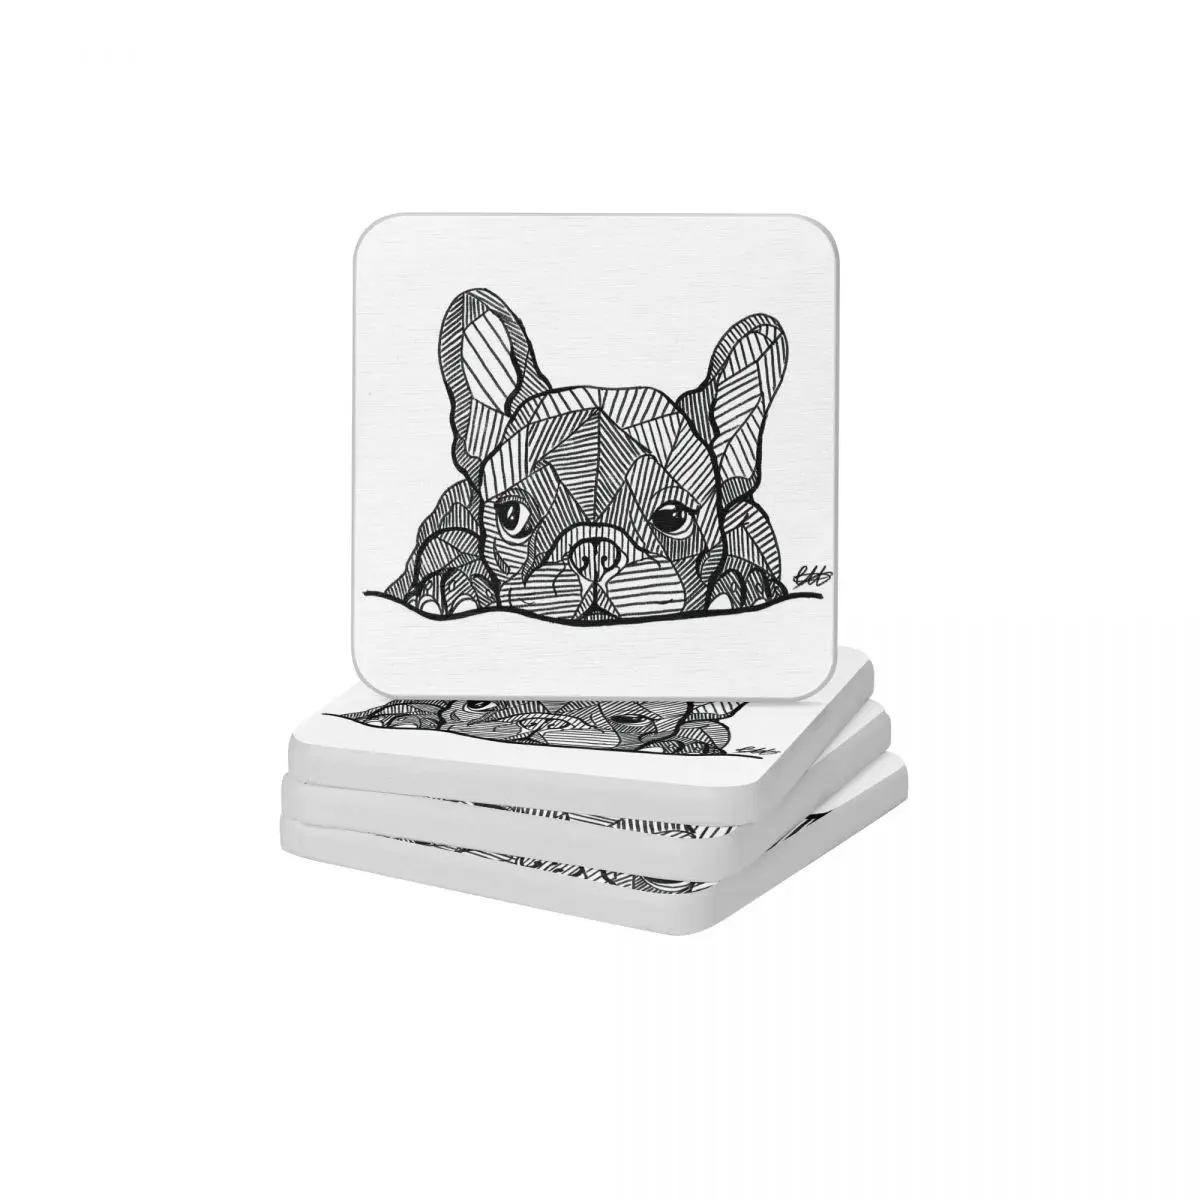 

French Bulldog Puppy Diatomaceous Earth Square Round Shape Coaster Water Absorption Cup Bonsai Mat Soap Toothbrush Pad 10x10cm